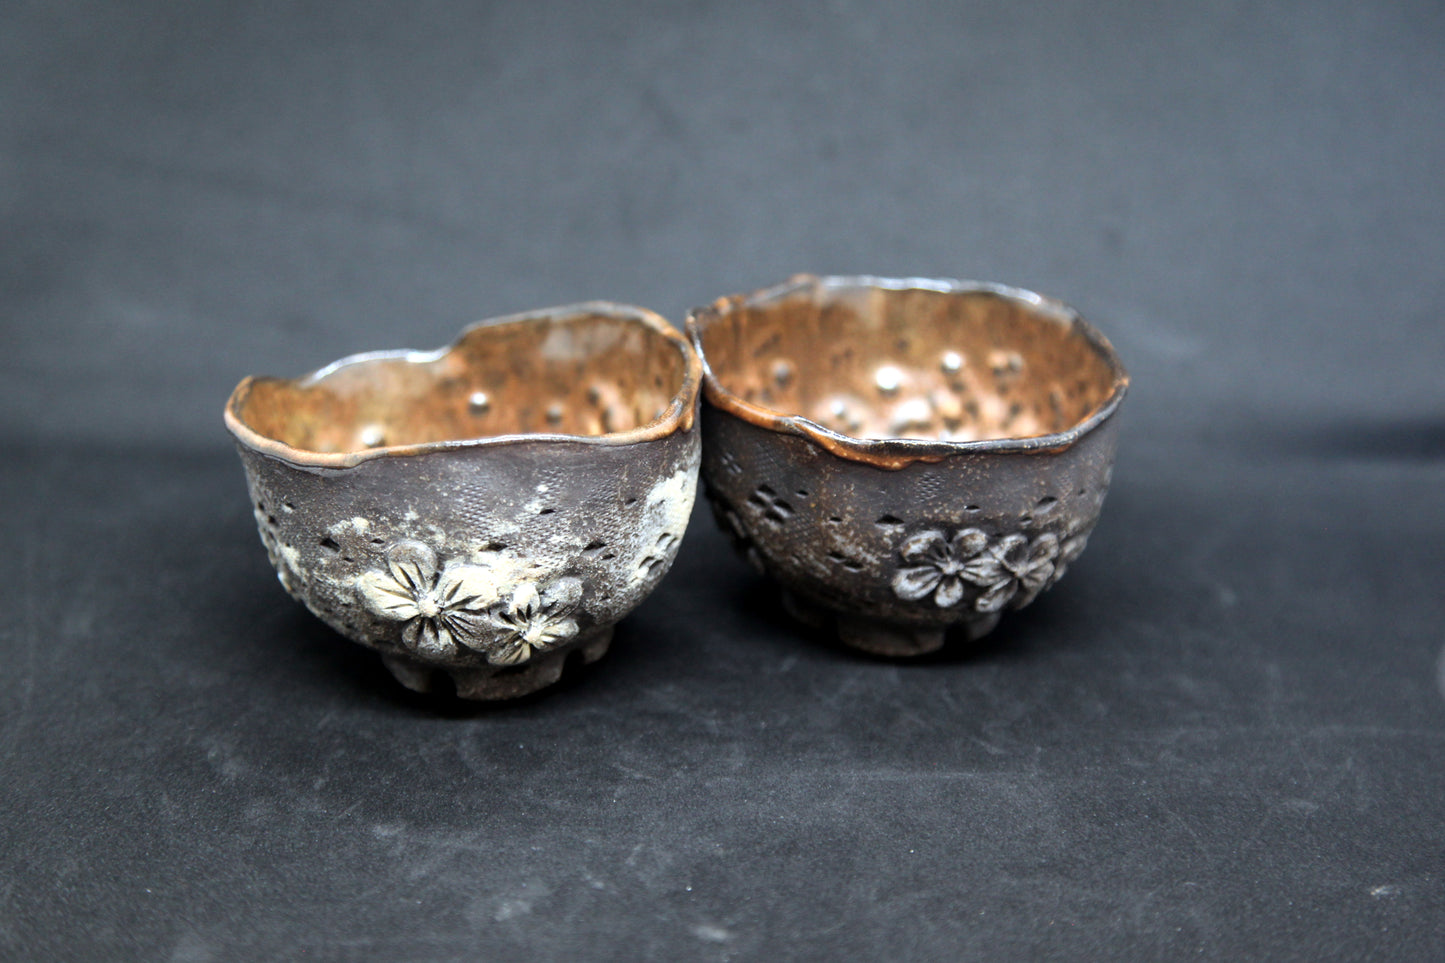 Caramel cups on black clay - flower patterns